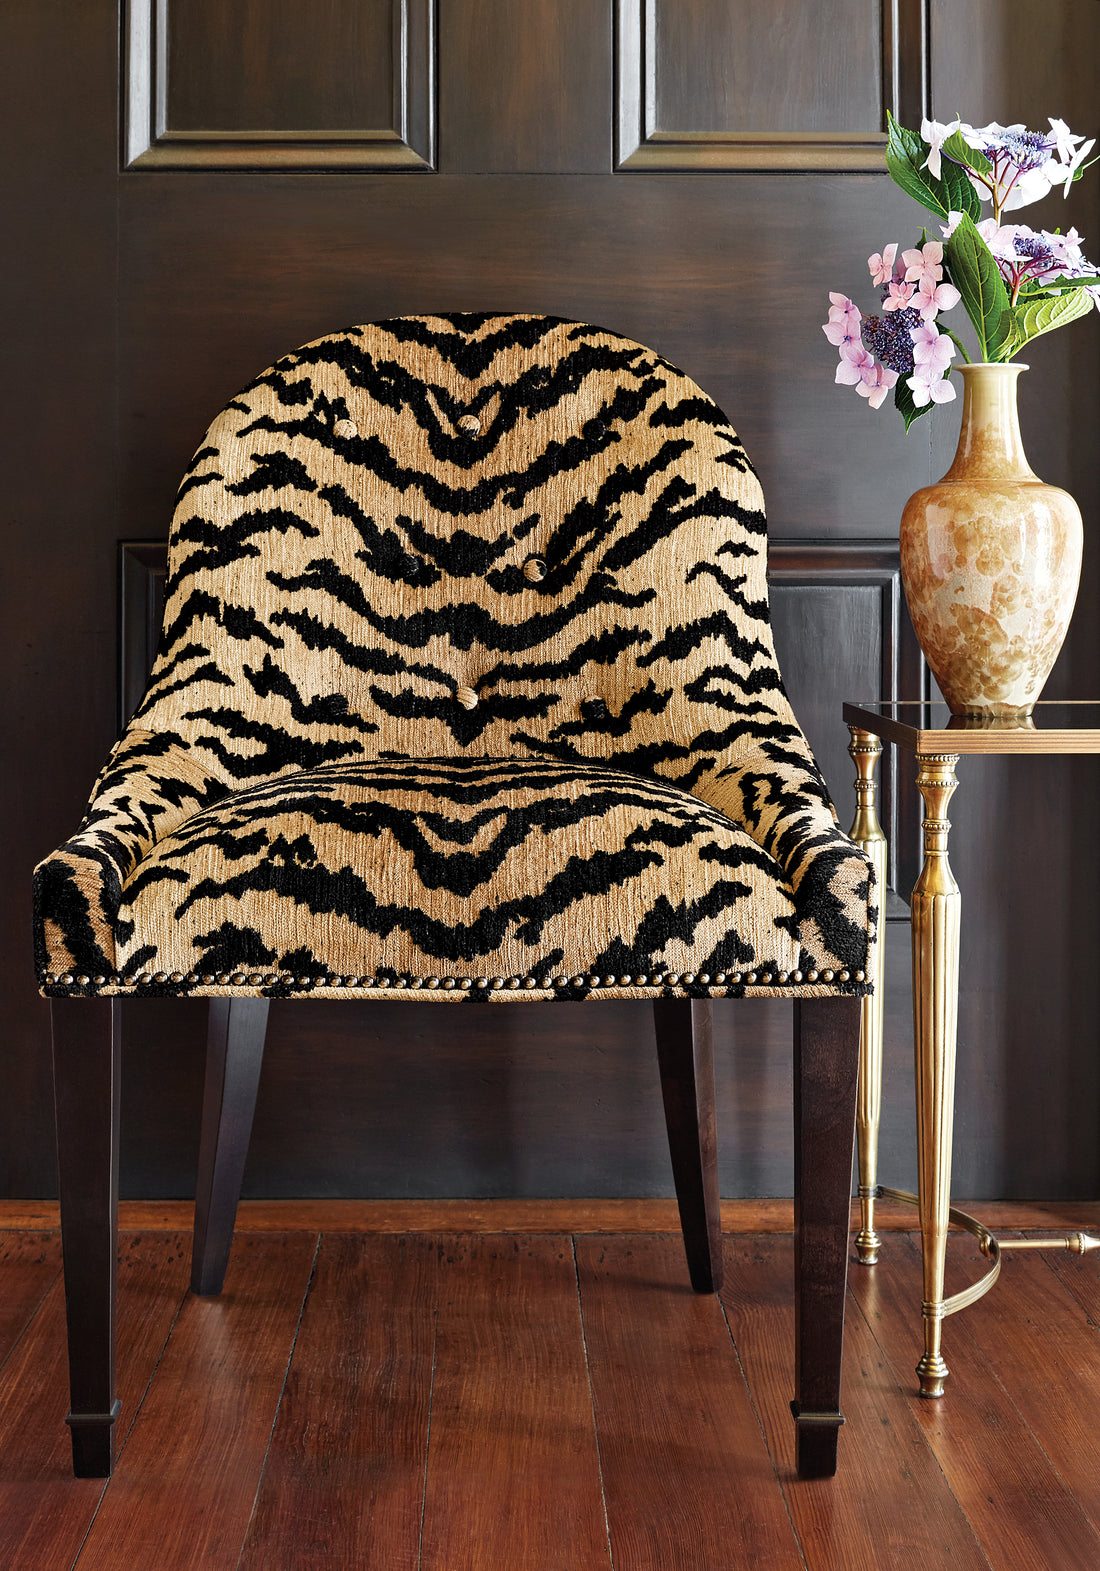 Melrose Chair in Aja woven fabric in black color - pattern number W80450 - by Thibaut in the Woven Resource Vol 10 Menagerie collection